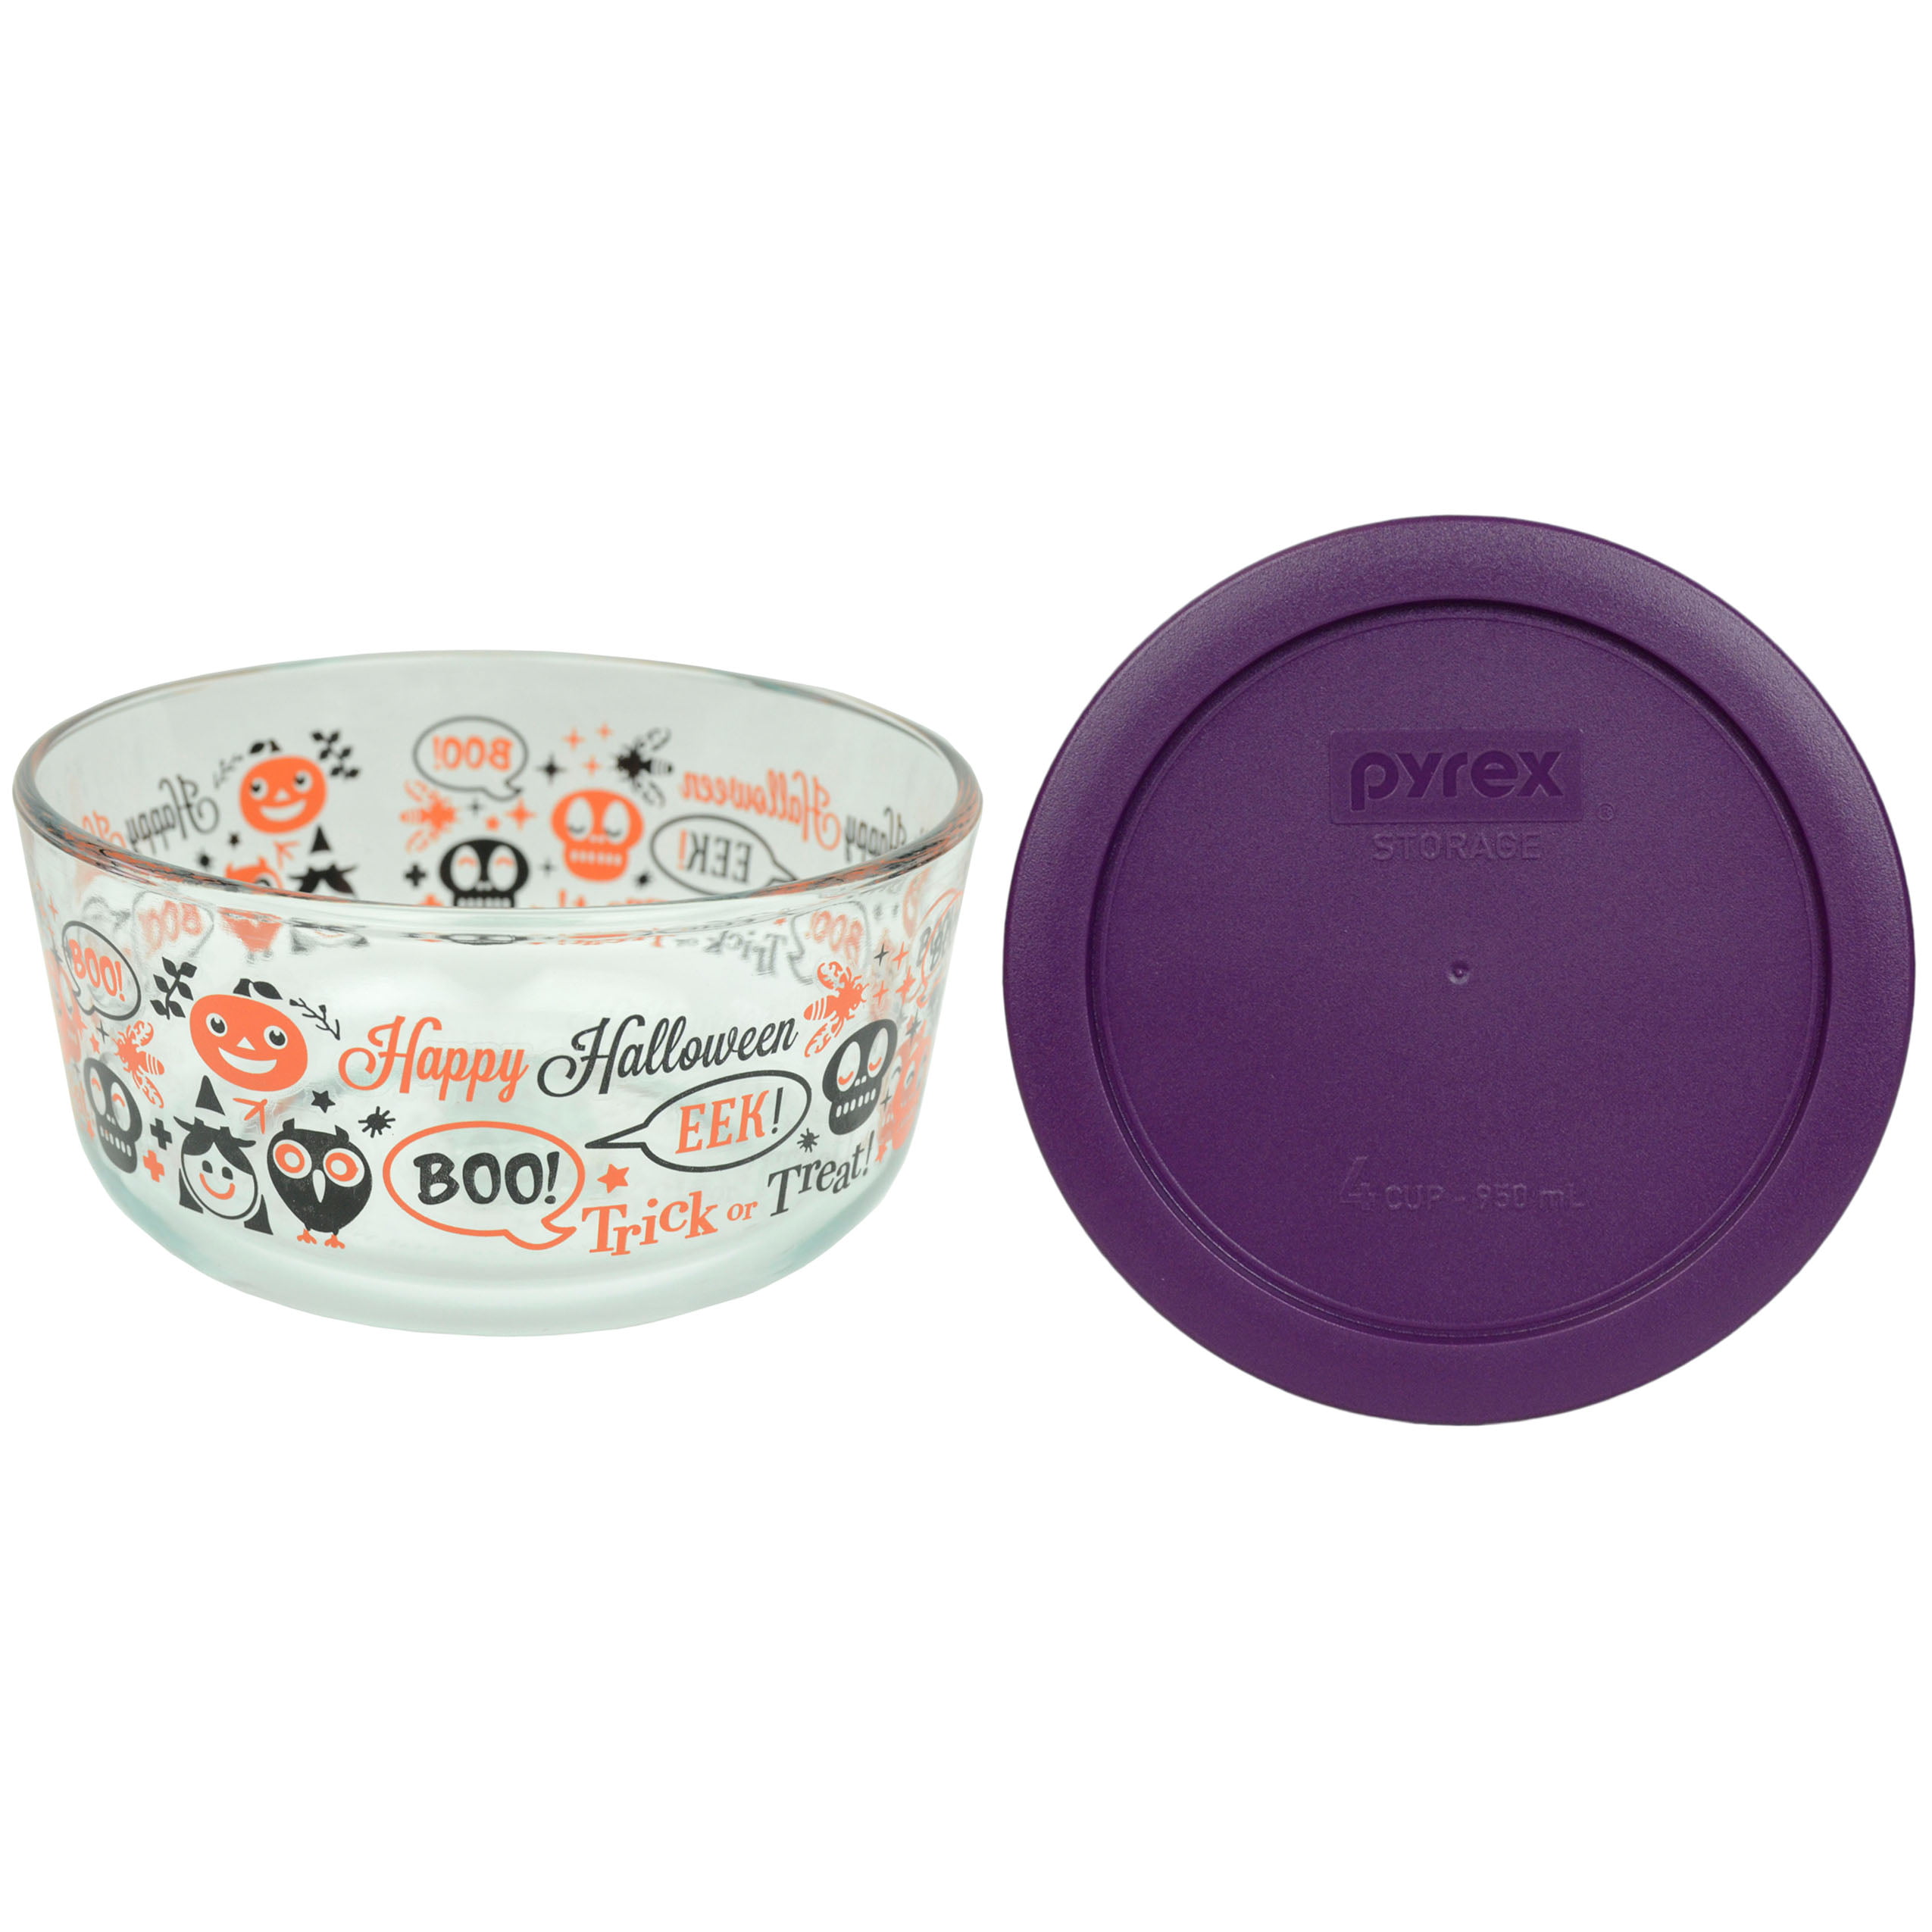 Pyrex 7201 4-Cup Spooky Fun Glass Bowl and 7201-PC Purple Plastic Lid Cover  - Walmart.com